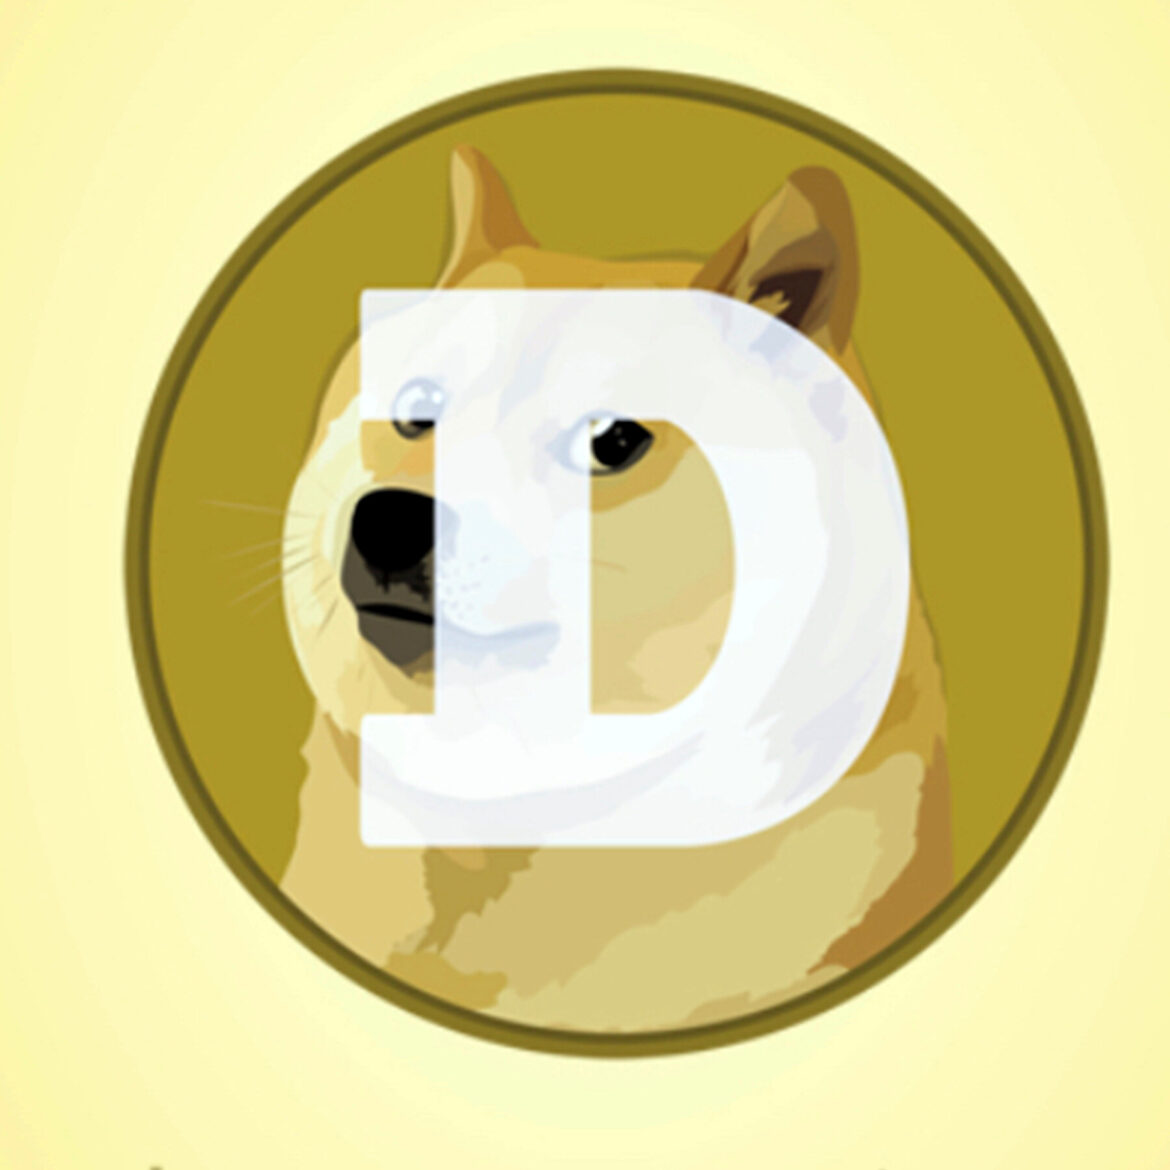 Will doge go back up: Everyone Wants to Know